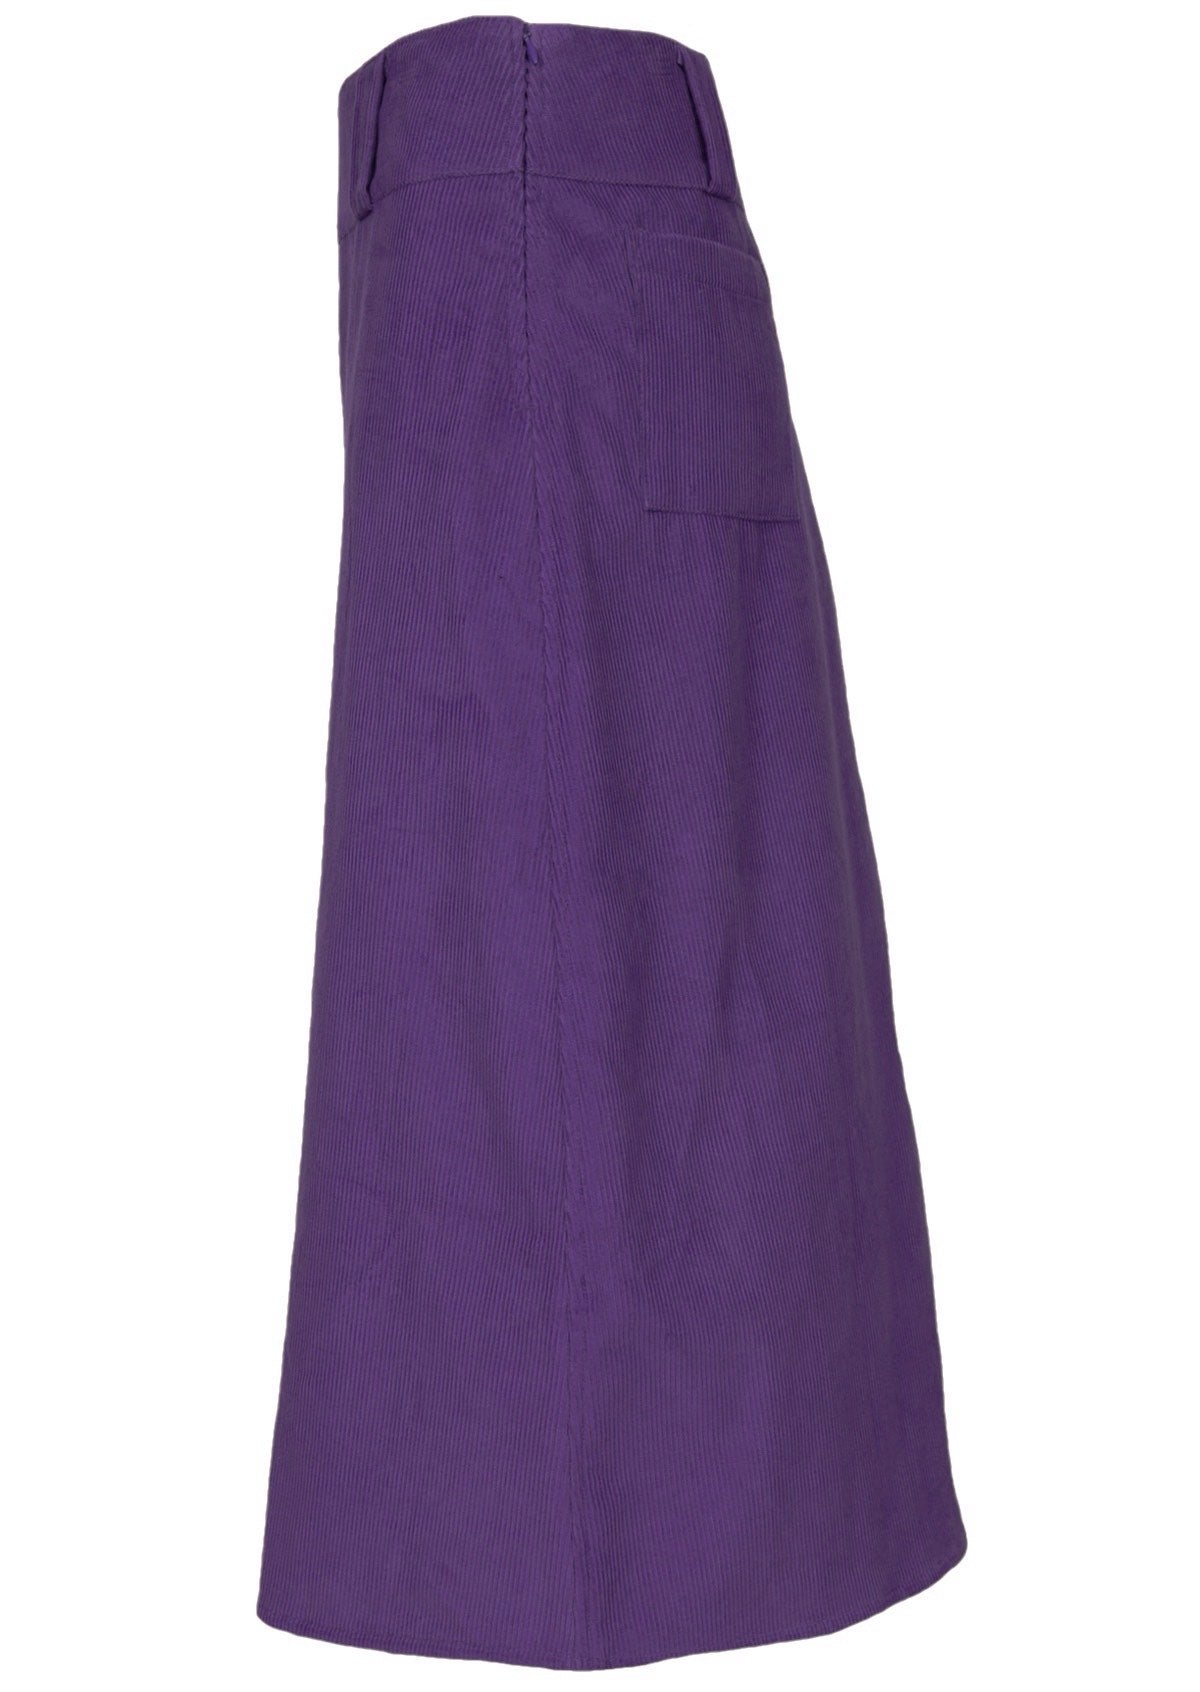 Purple corduroy skirt that ends on the shin features pockets at the back.